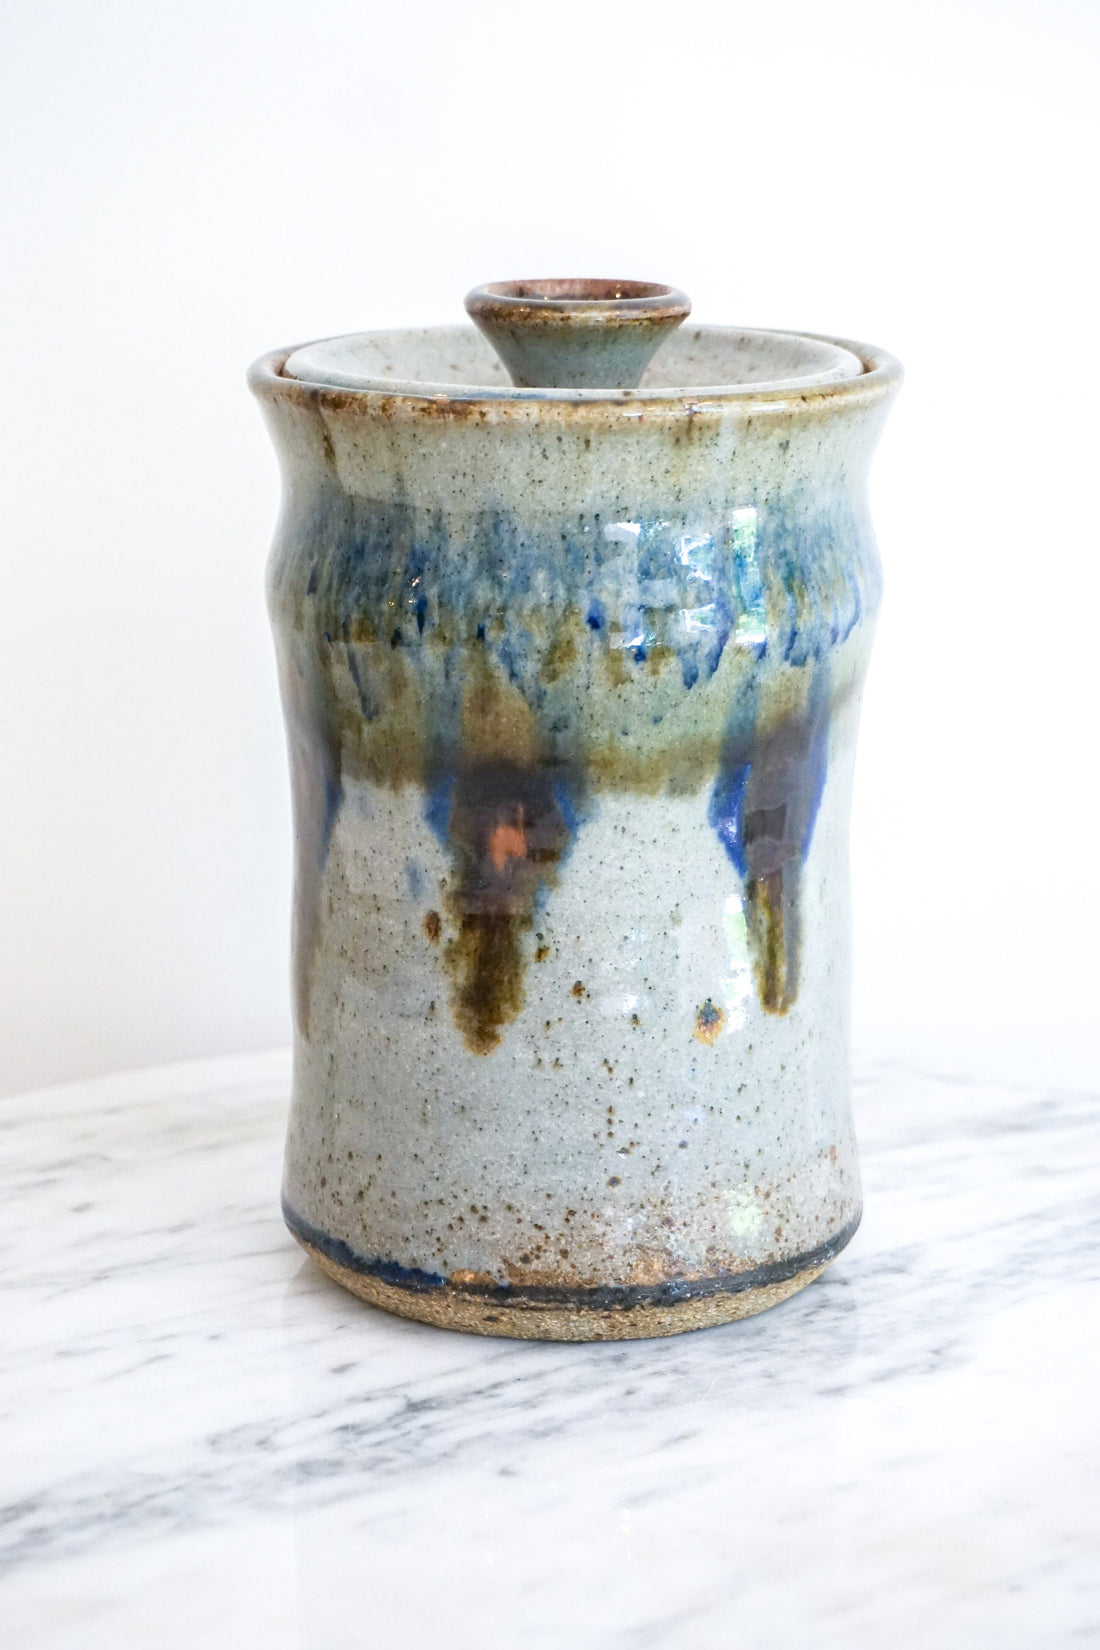 Ceramic Pottery Canister Jar with Lid with Blue Drip Glaze Detailing